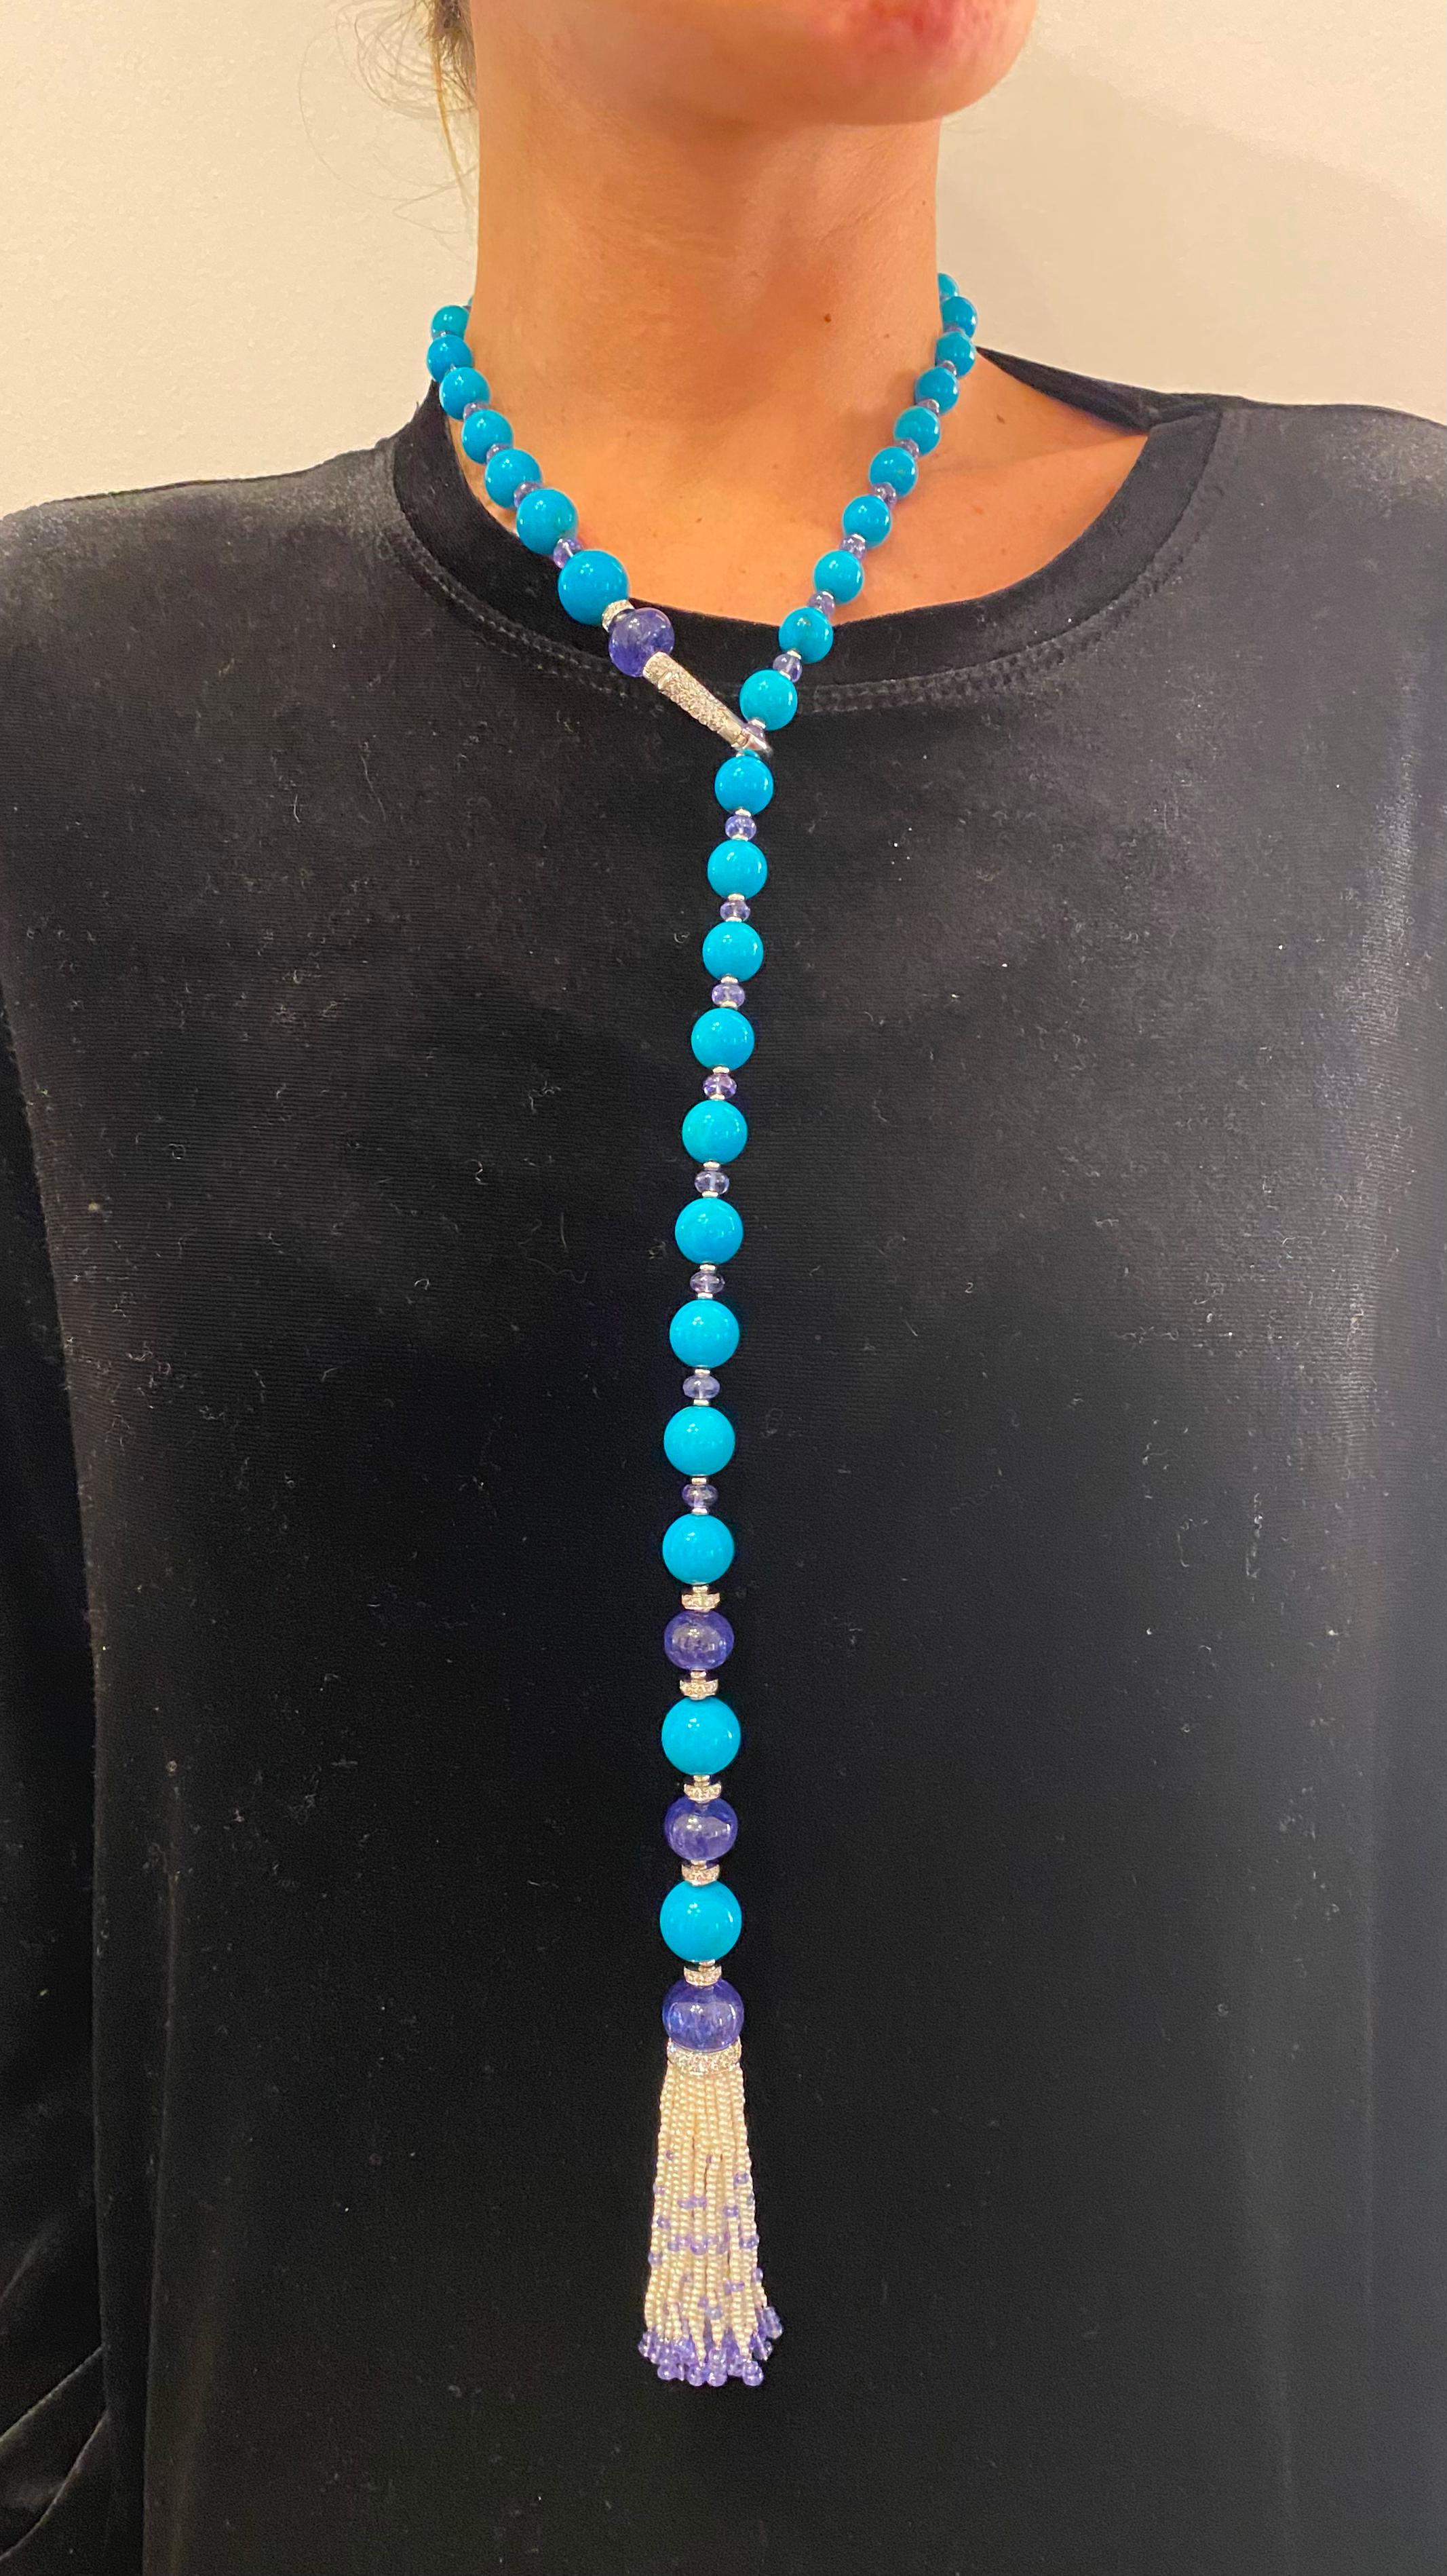 Introducing the EGIZIA Turquoise and Tanzanite Necklace, an exquisite piece crafted in 18K white gold, designed to evoke the splendor of ancient seas and the allure of precious gemstones. The necklace features large natural Persian turquoise